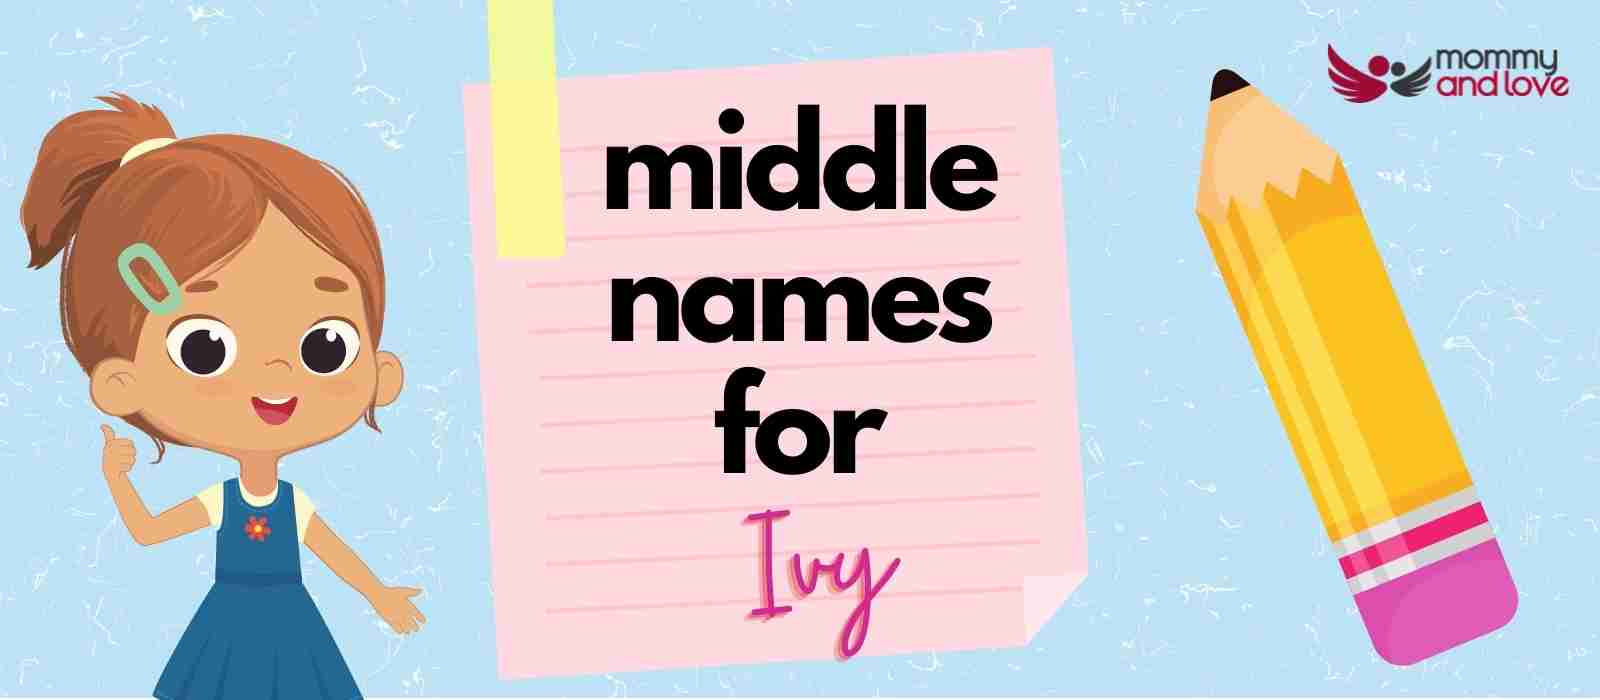 Middle Names for Ivy